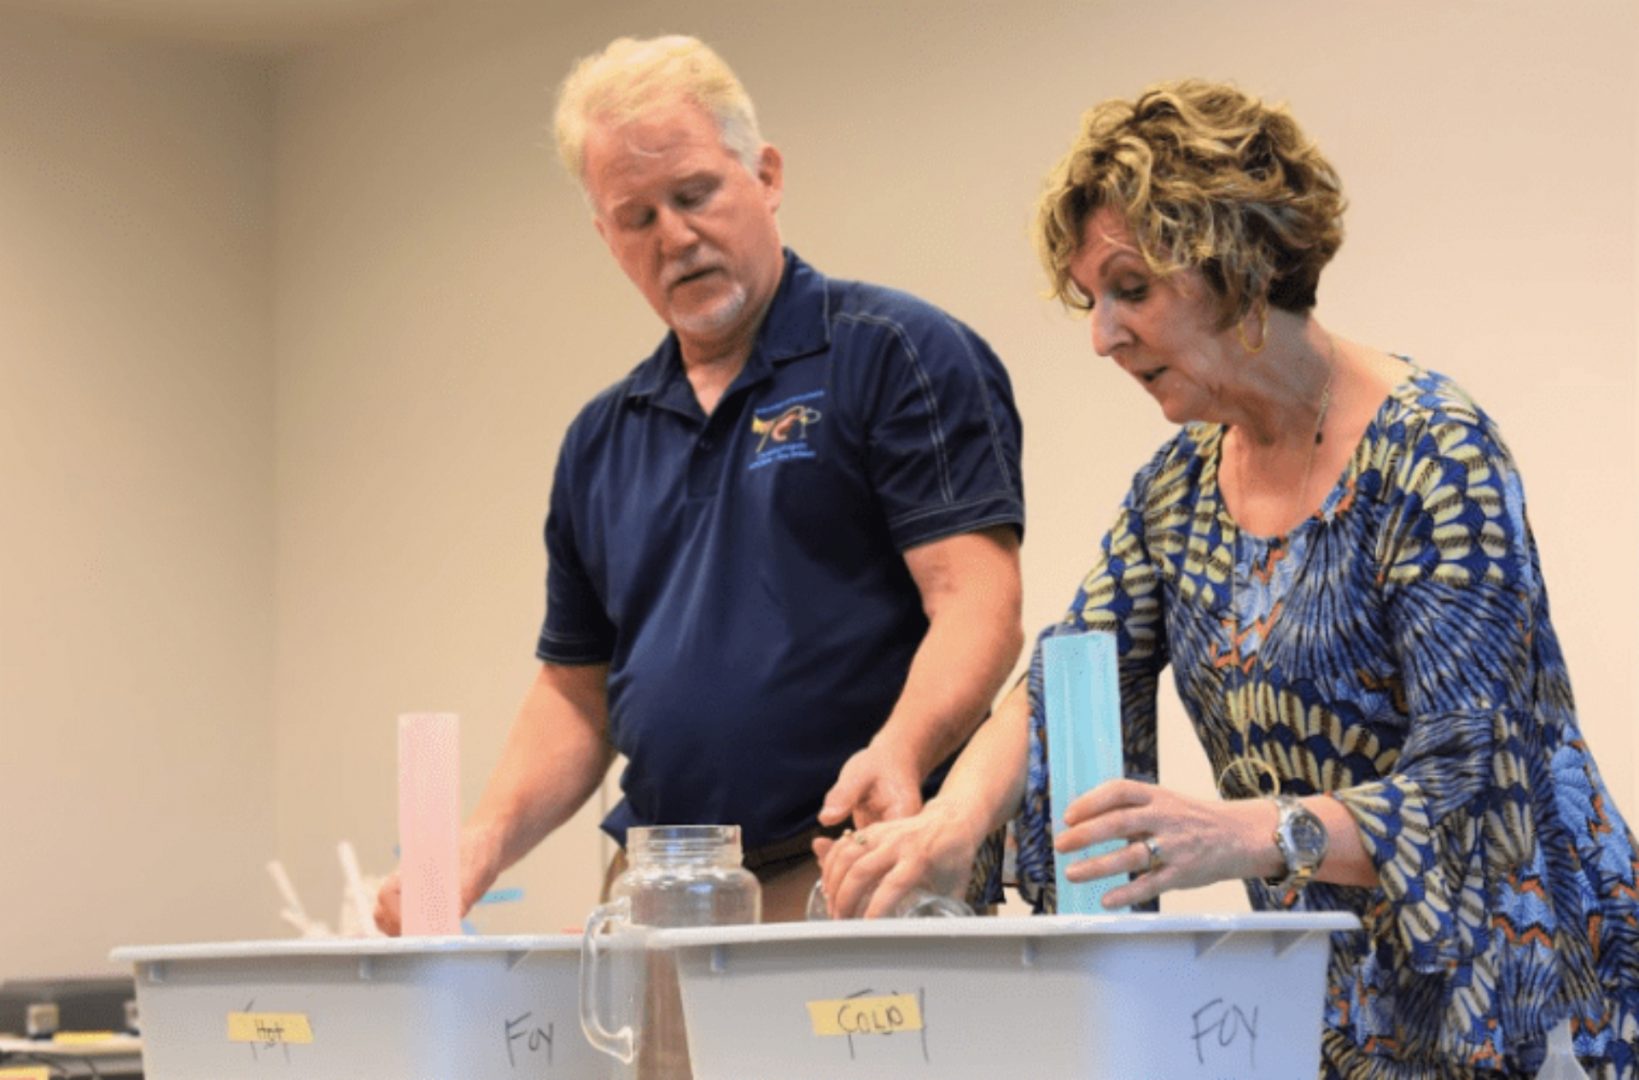 Science teacher Leigh Foy (right) couldn't find climate education materials so she and her husband, chemistry professor Greg Foy (left) designed their own.  